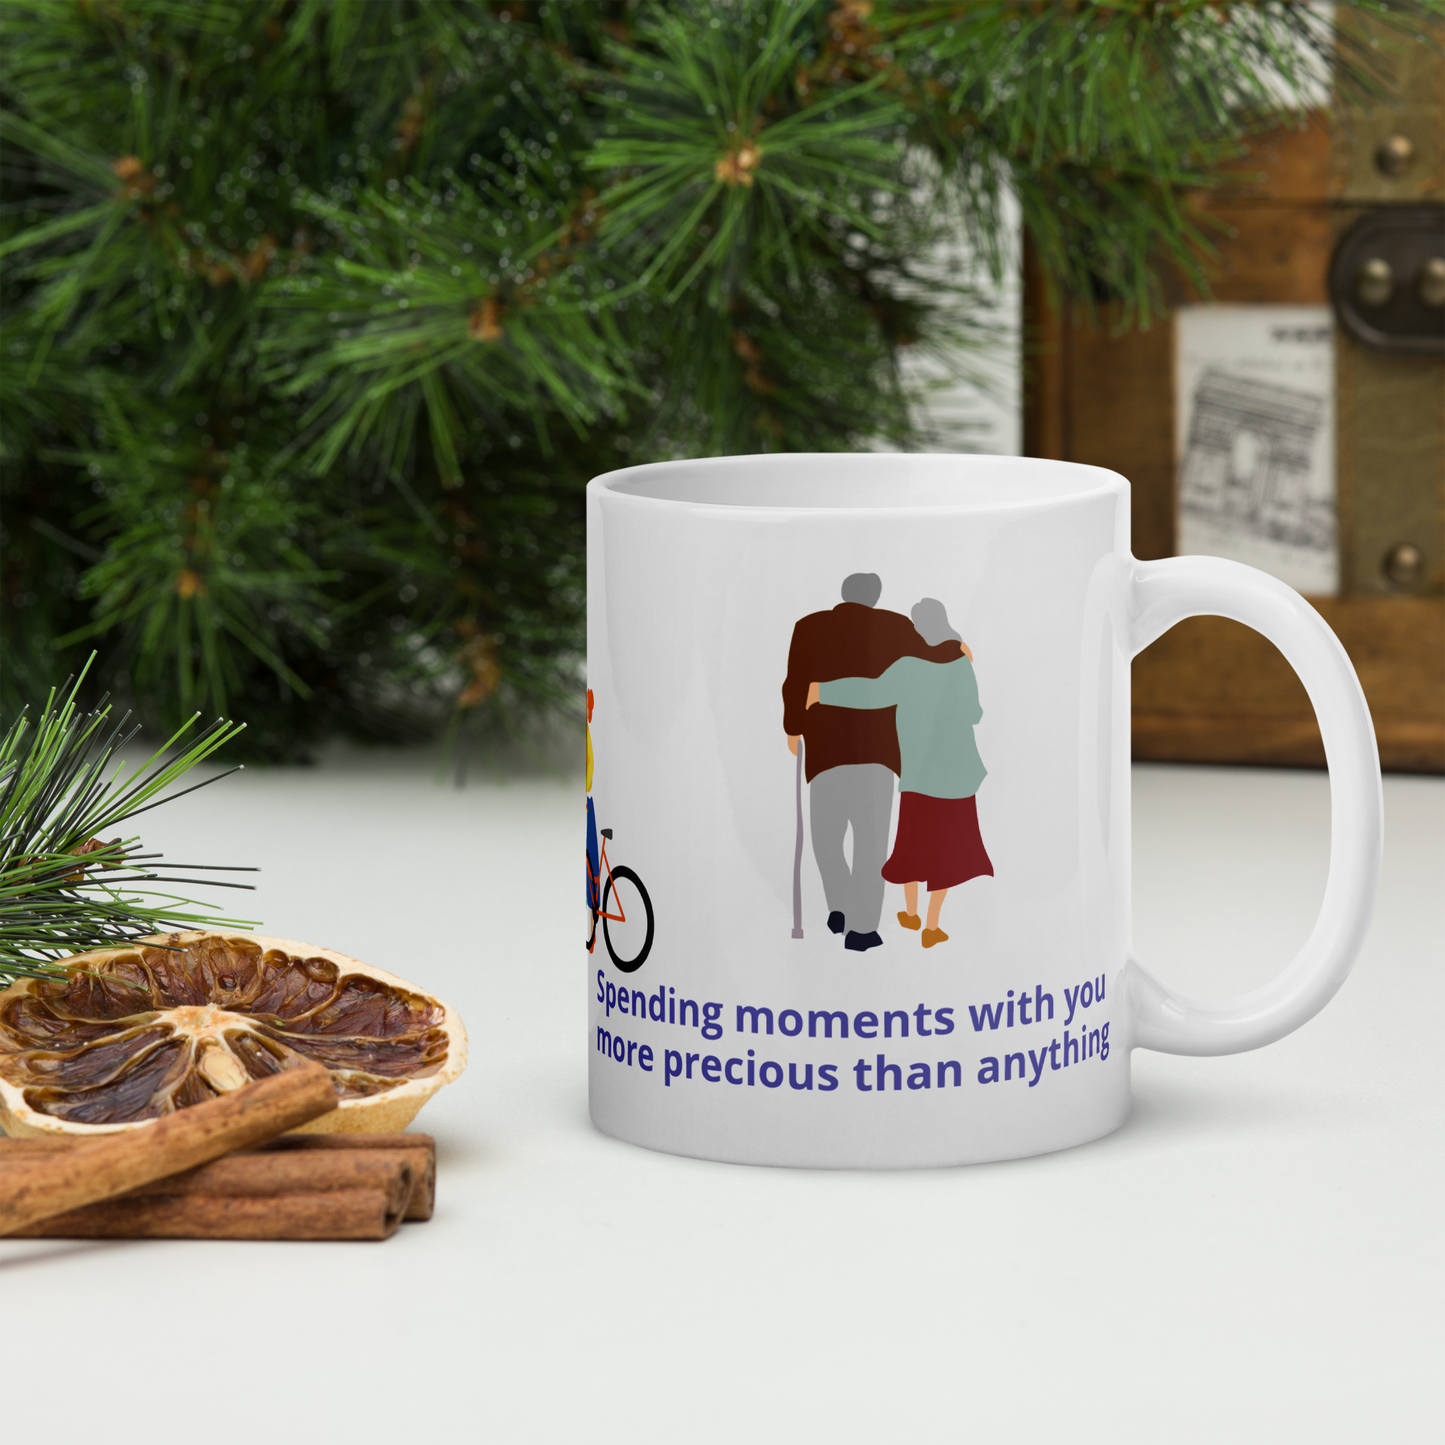 A perfect gift for lifetime - With personalised any text any picture -Mugs for couple, friends , Anniversary Gift with custom message